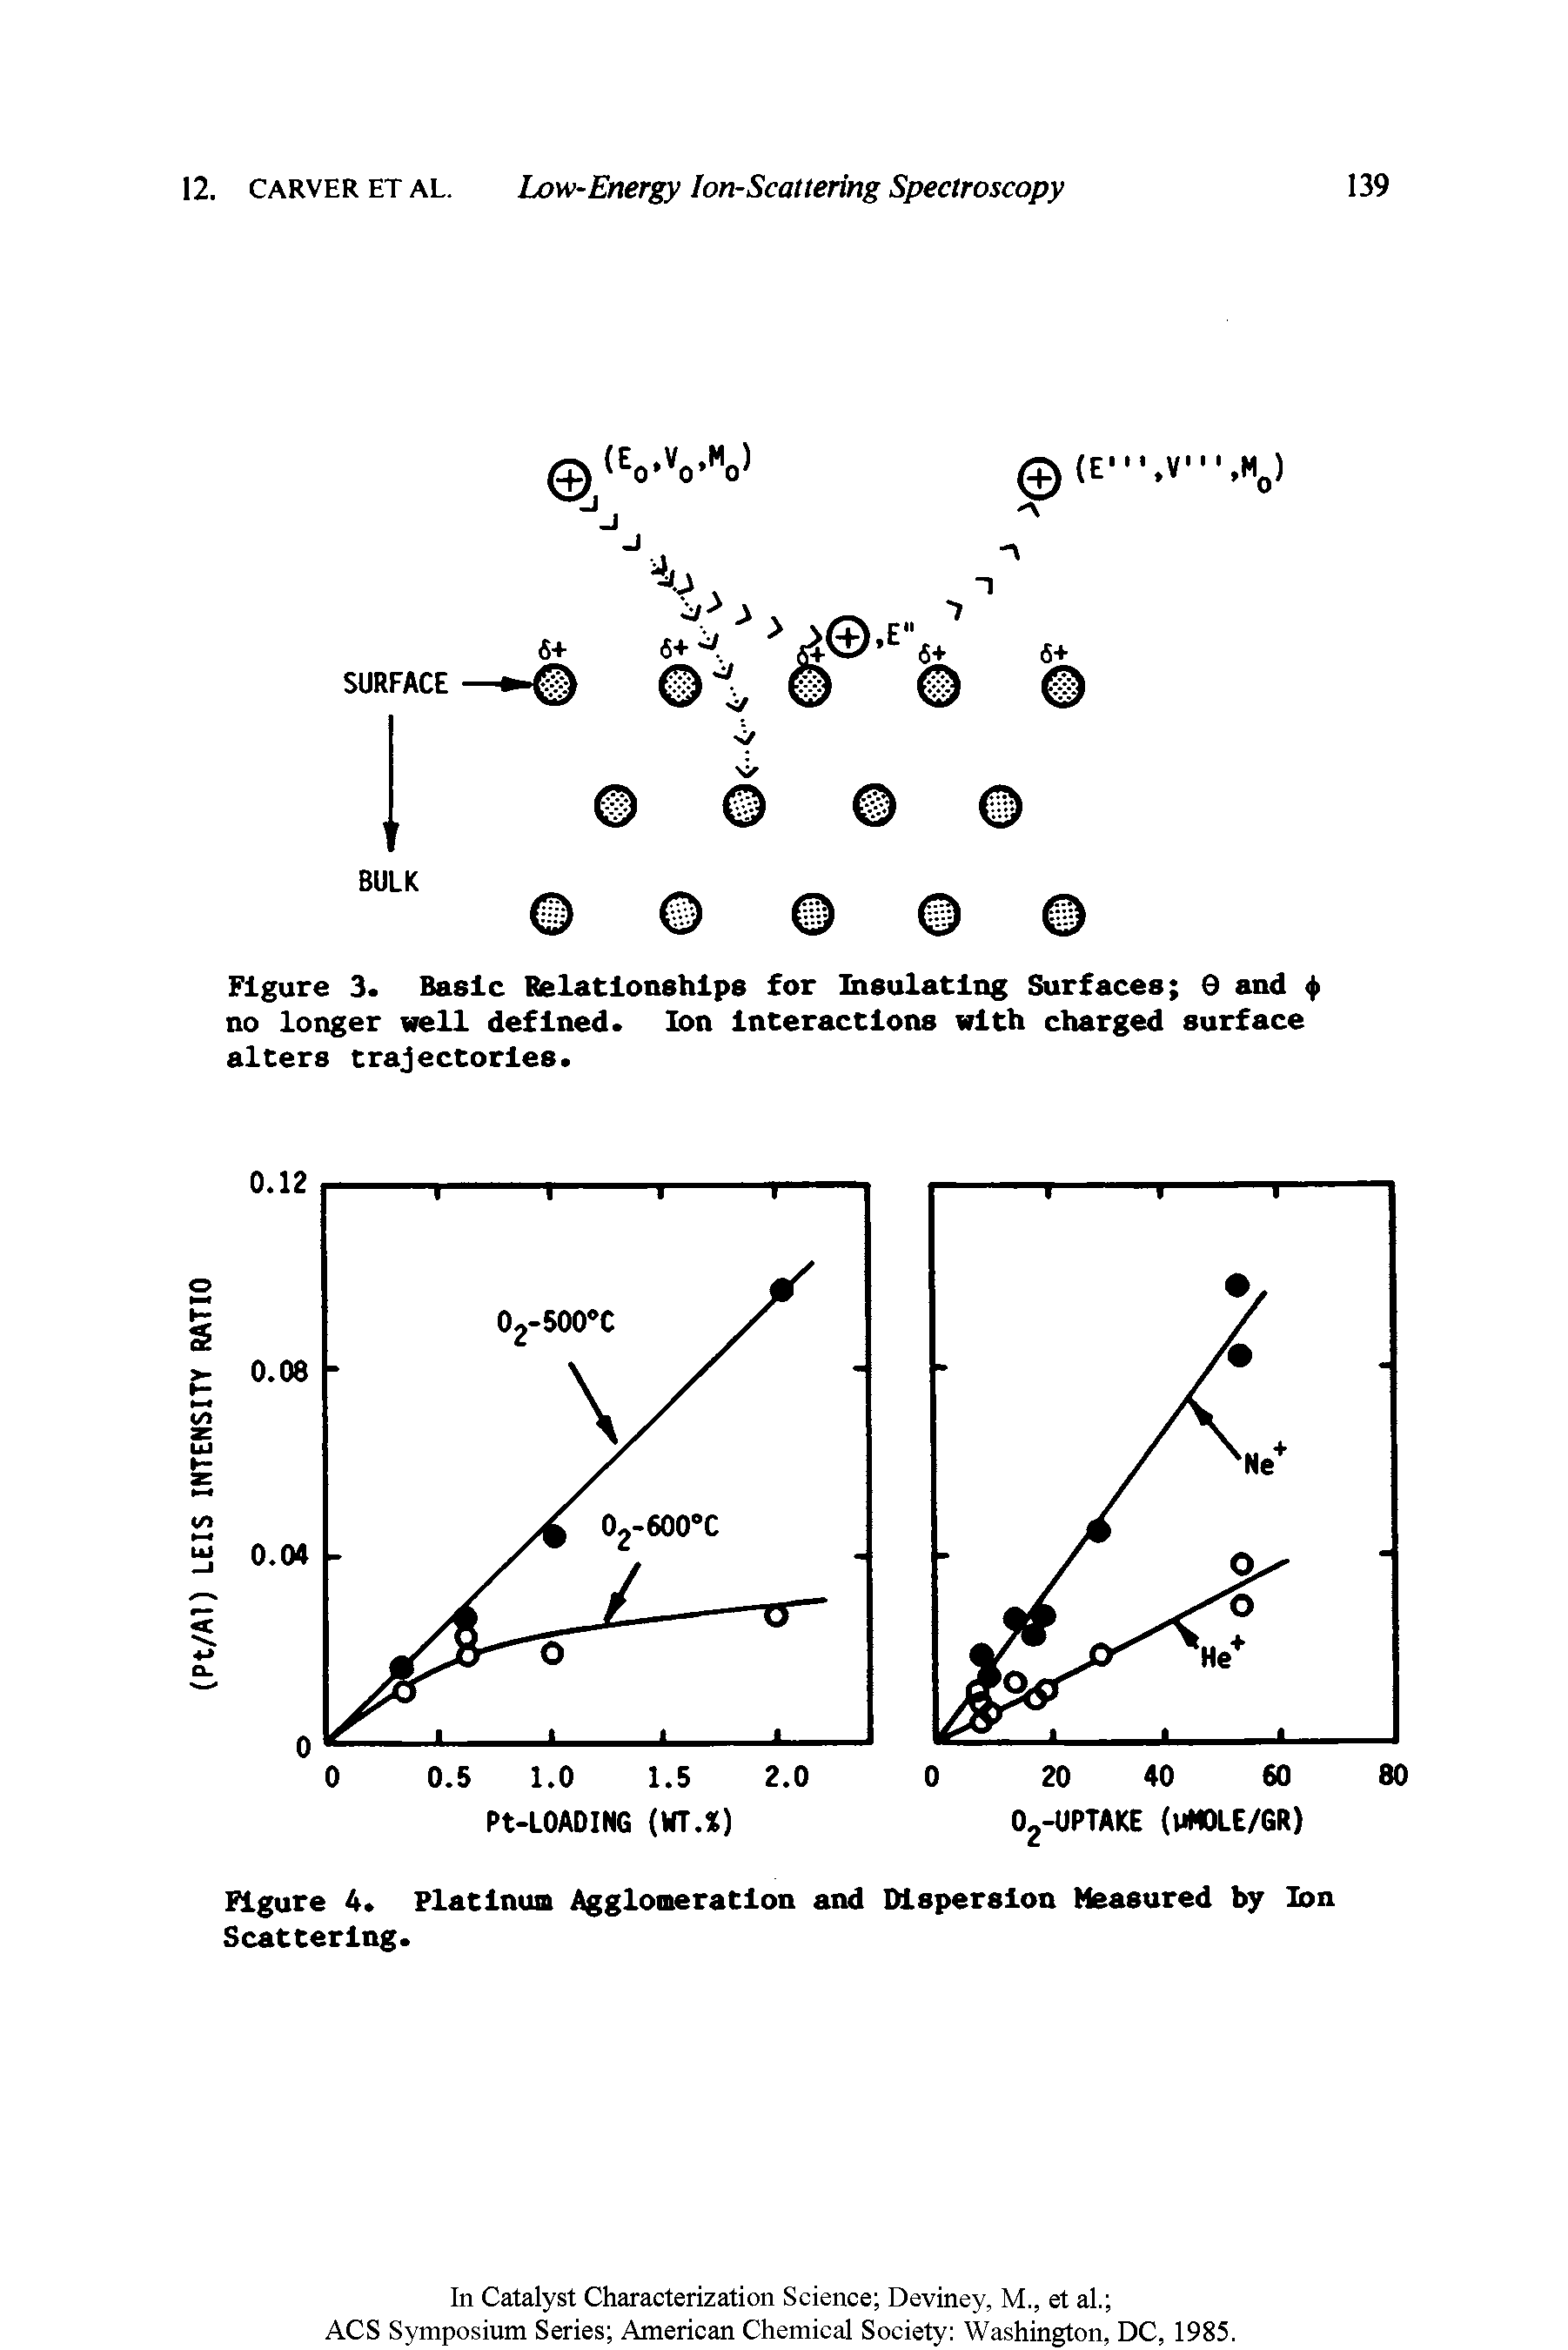 Figure 3. Basic Relationships for Insulating Surfaces 3 and no longer well defined. Ion Interactions with charged surface alters trajectories.